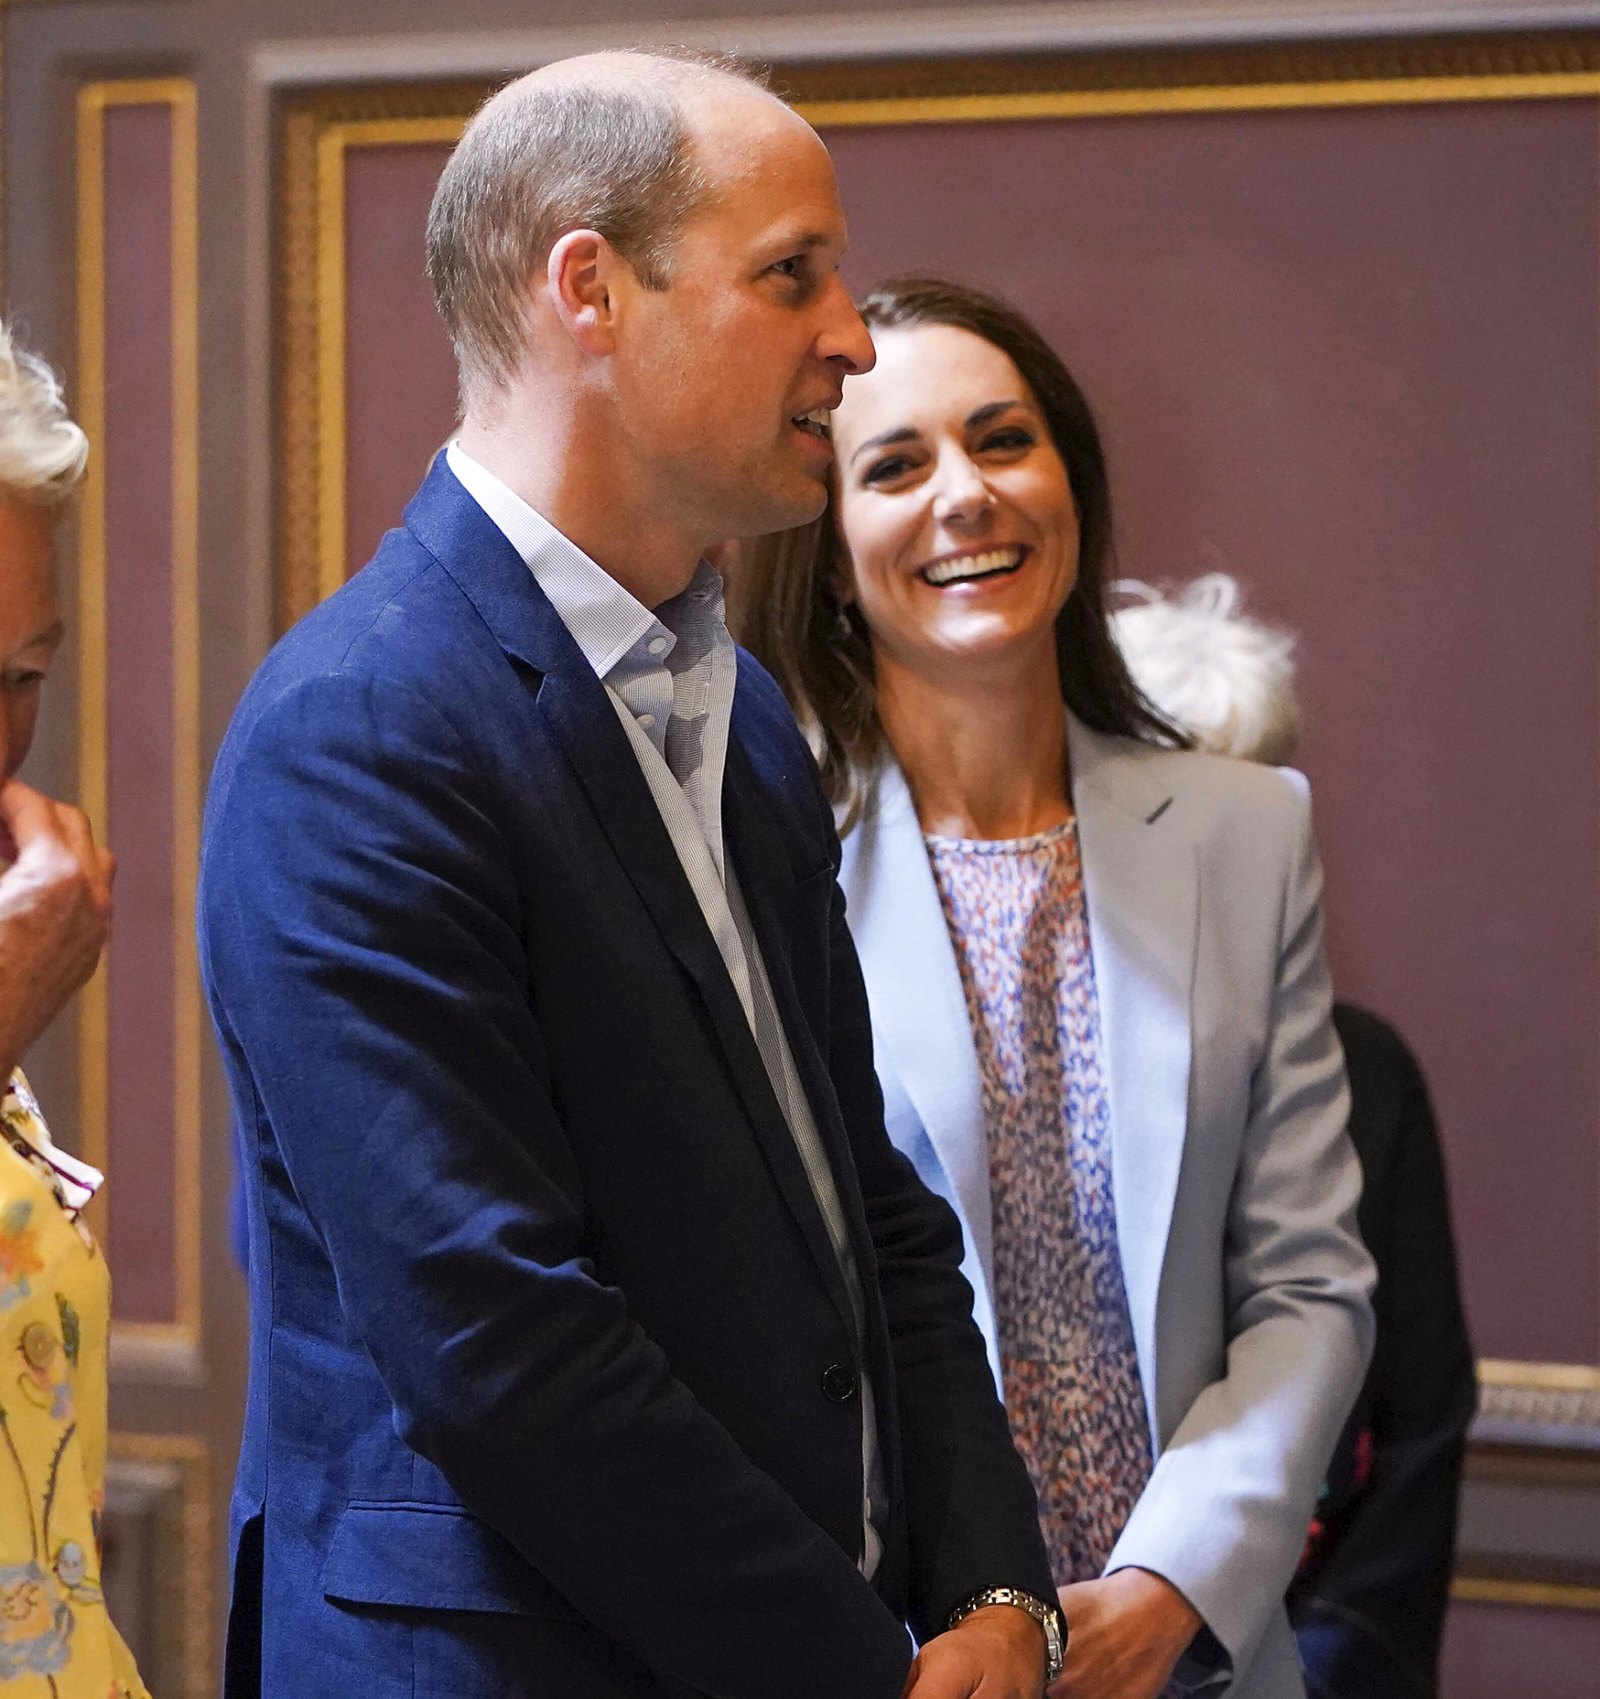 Prince William and Kate Middleton Unveil Their 1st Official Portrait Together